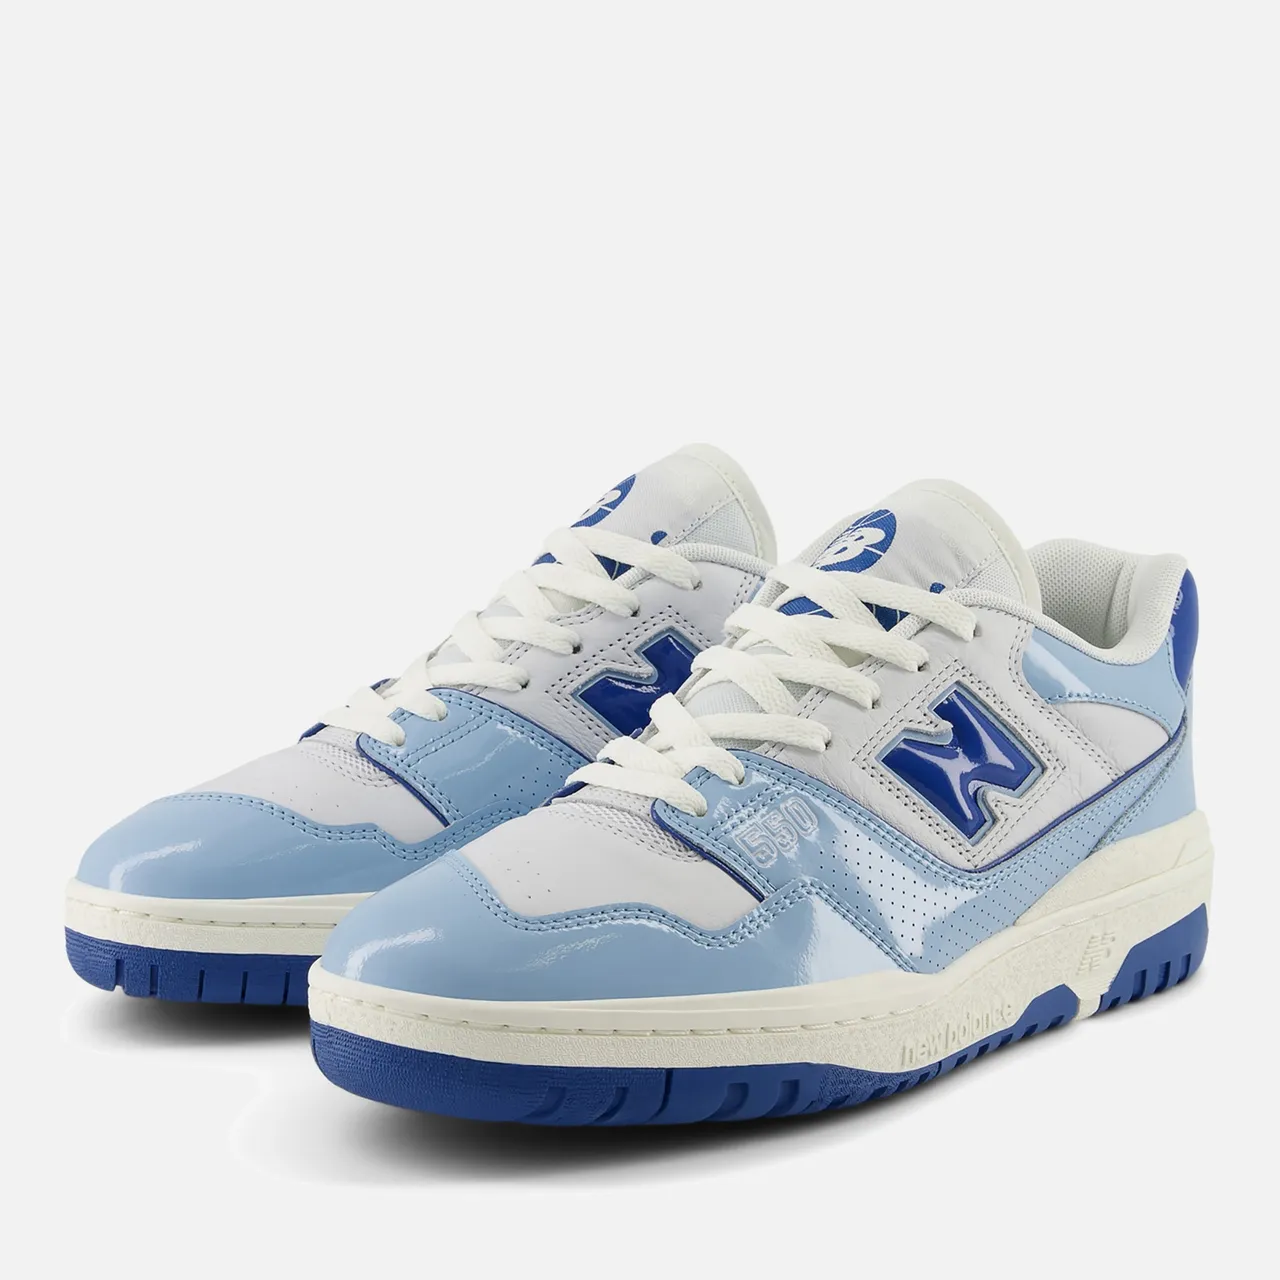 New Balance Men's 550 Leather Trainers - UK